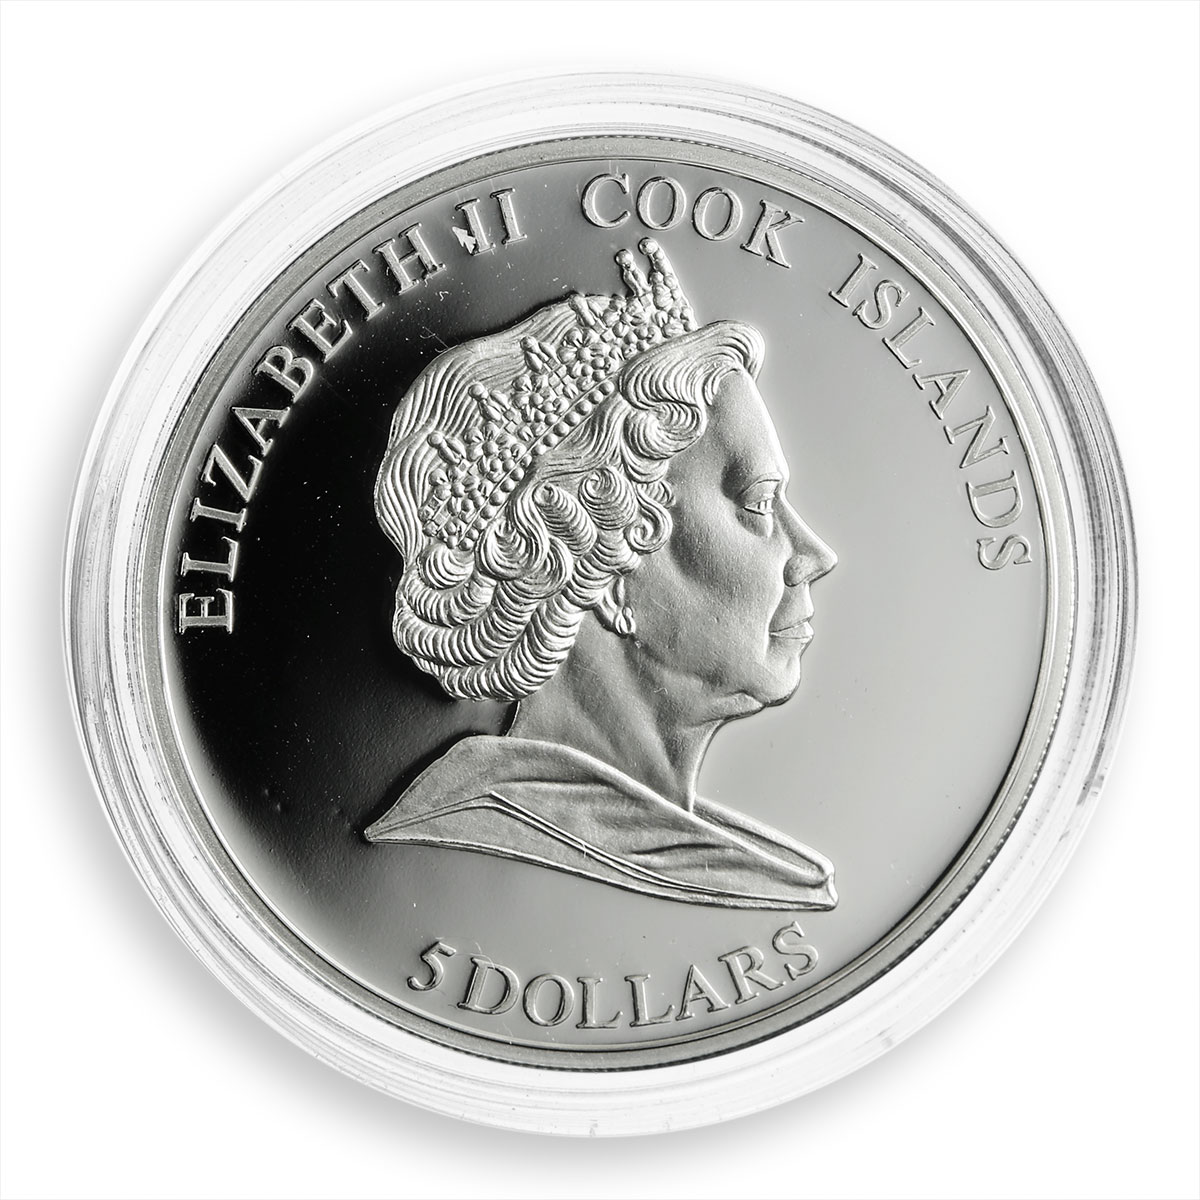 Cook Island, $5, Women's Day, Roses, 8 March, flowers, silver, coin, 2009